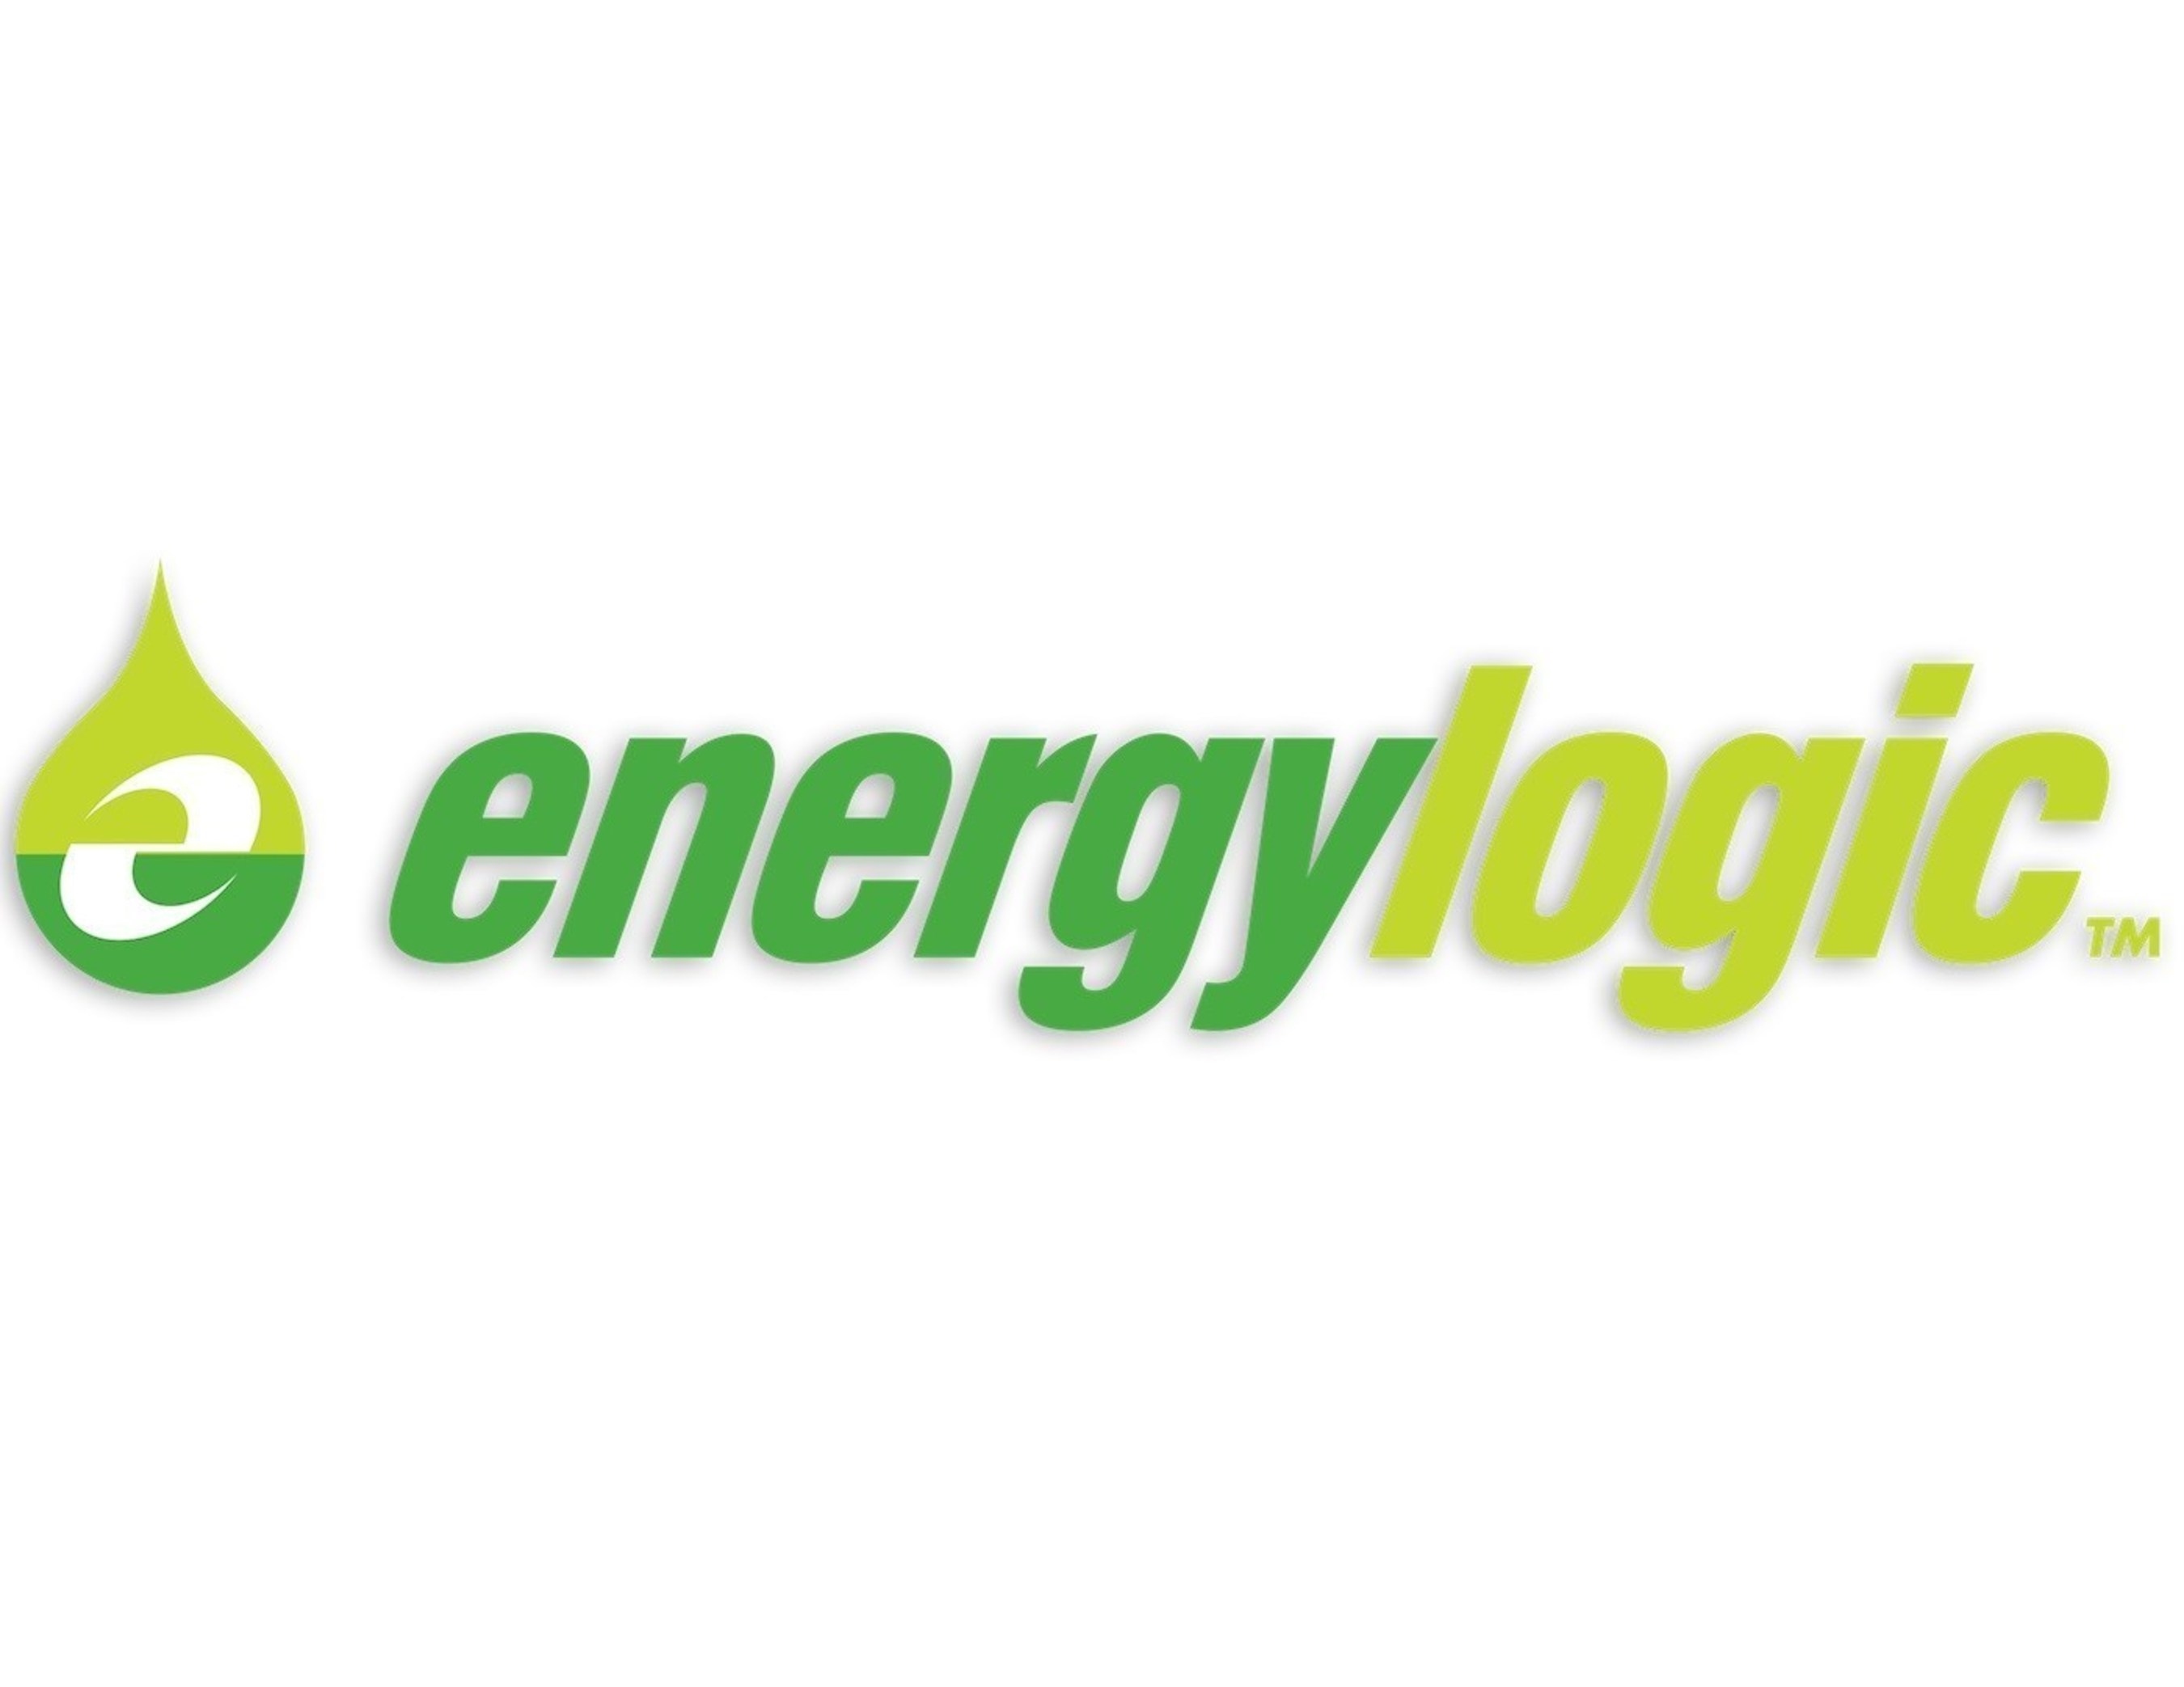 EnergyLogic LLC Waste Oil Heaters, HVLS Fans, and Portable Radiant Heaters